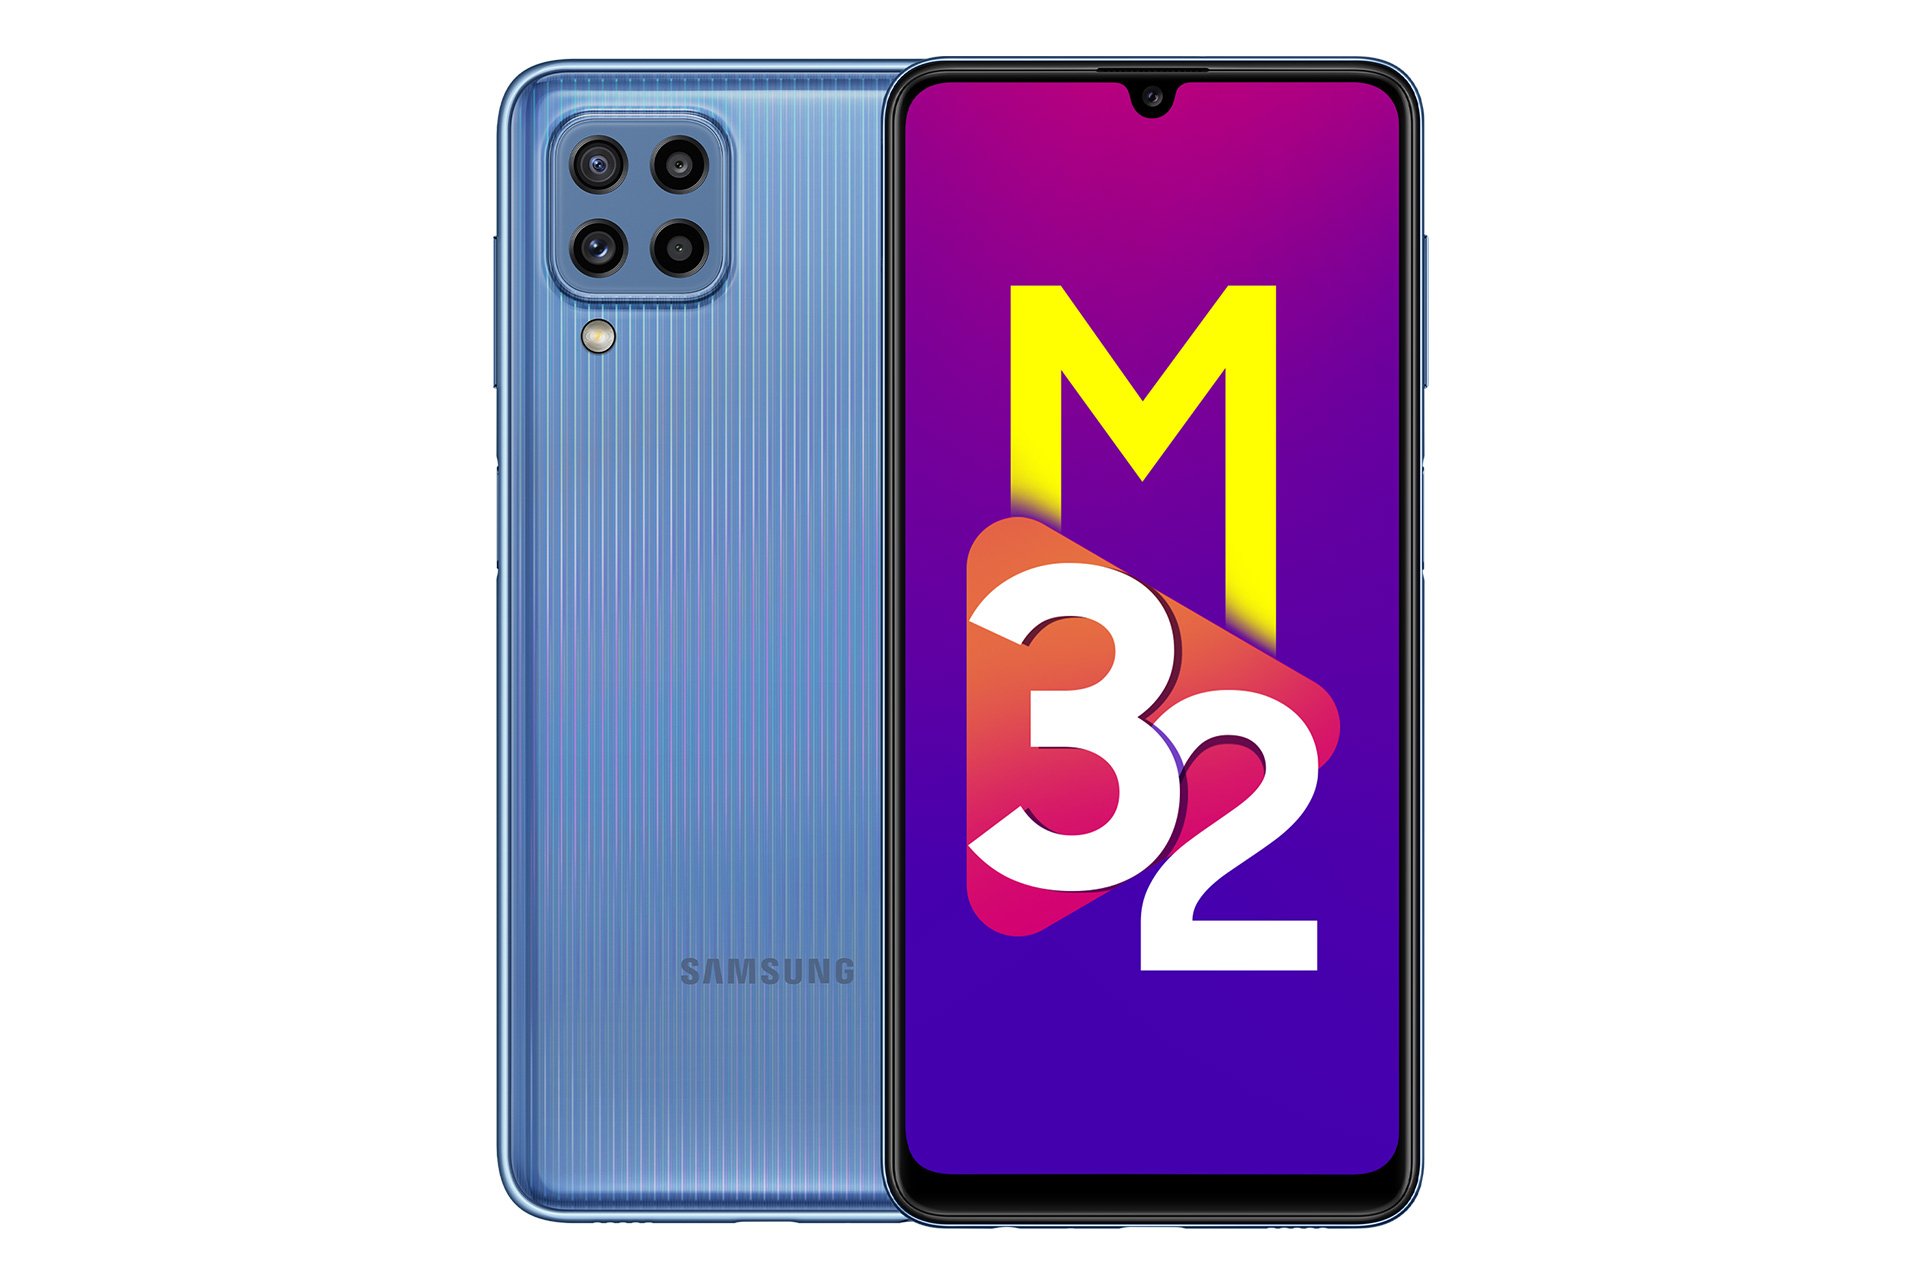 Galaxy m 32. Samsung Galaxy m32 5g. Samsung m32 4g. Samsung m32 6/128. Galaxy m32 Review.